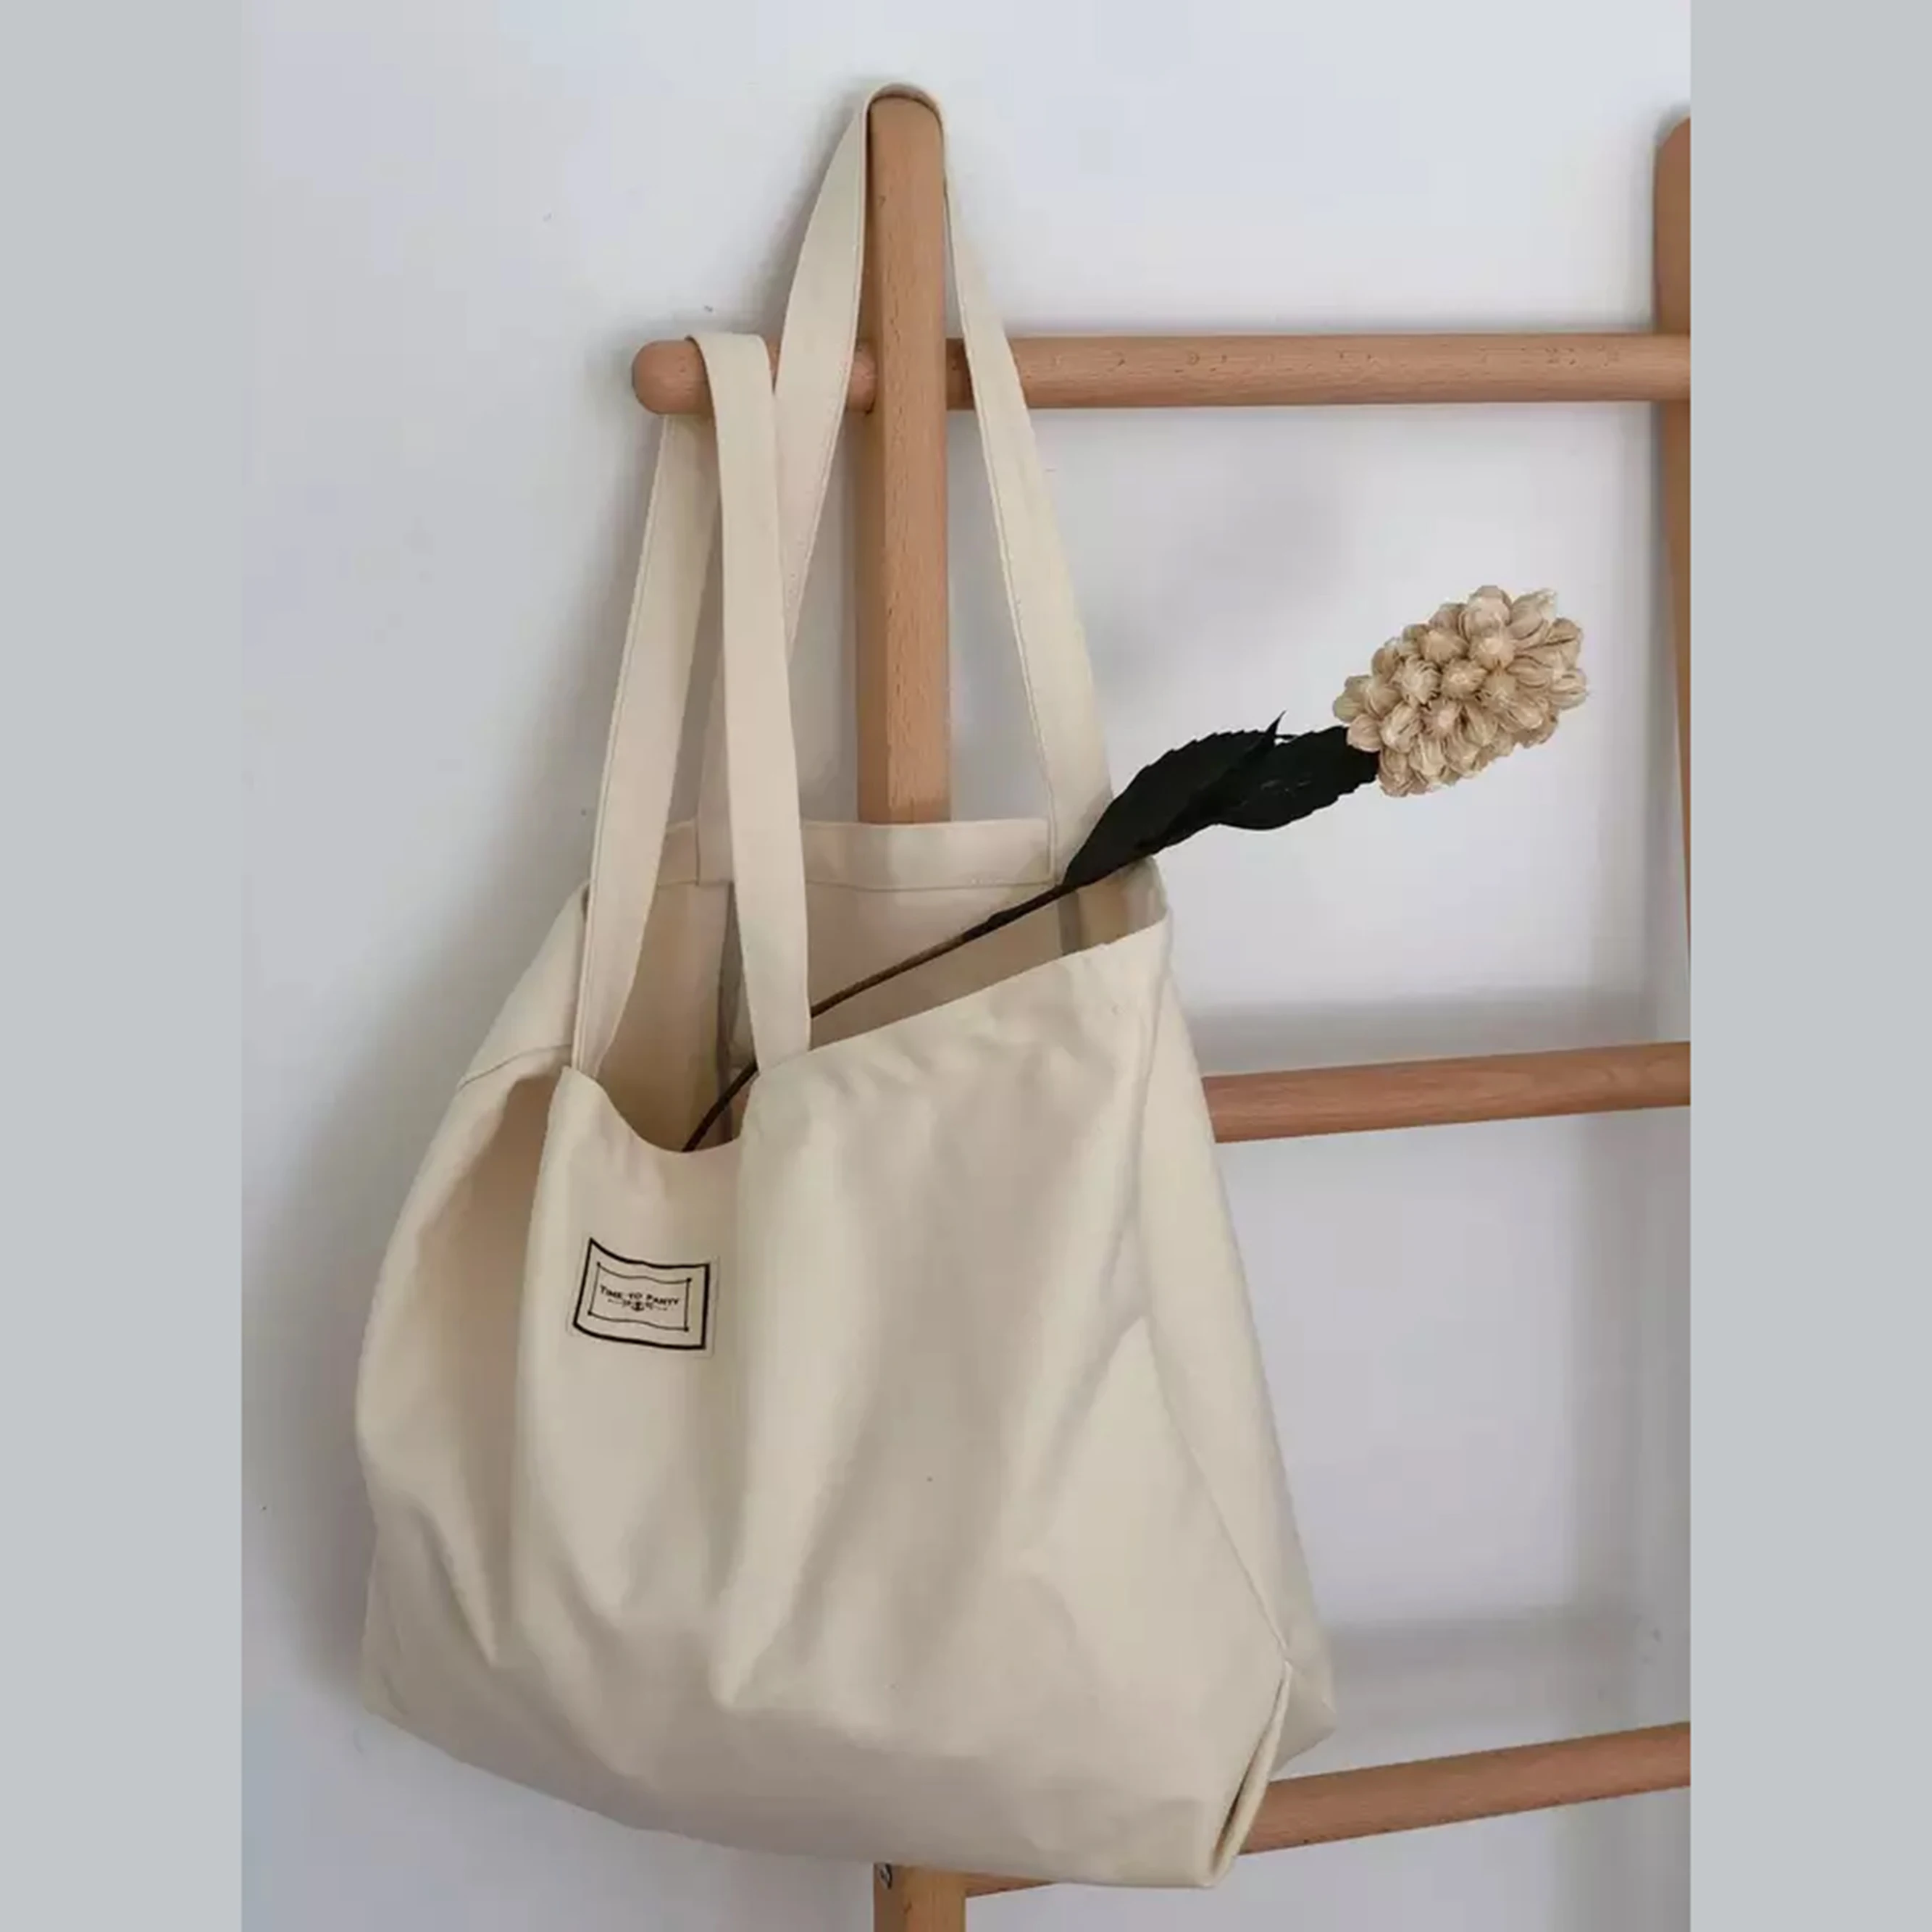 Blank Canvas Tote Bags Wholesale  Blank Canvas Cotton Tote Bags -  100pcs/lot - Aliexpress